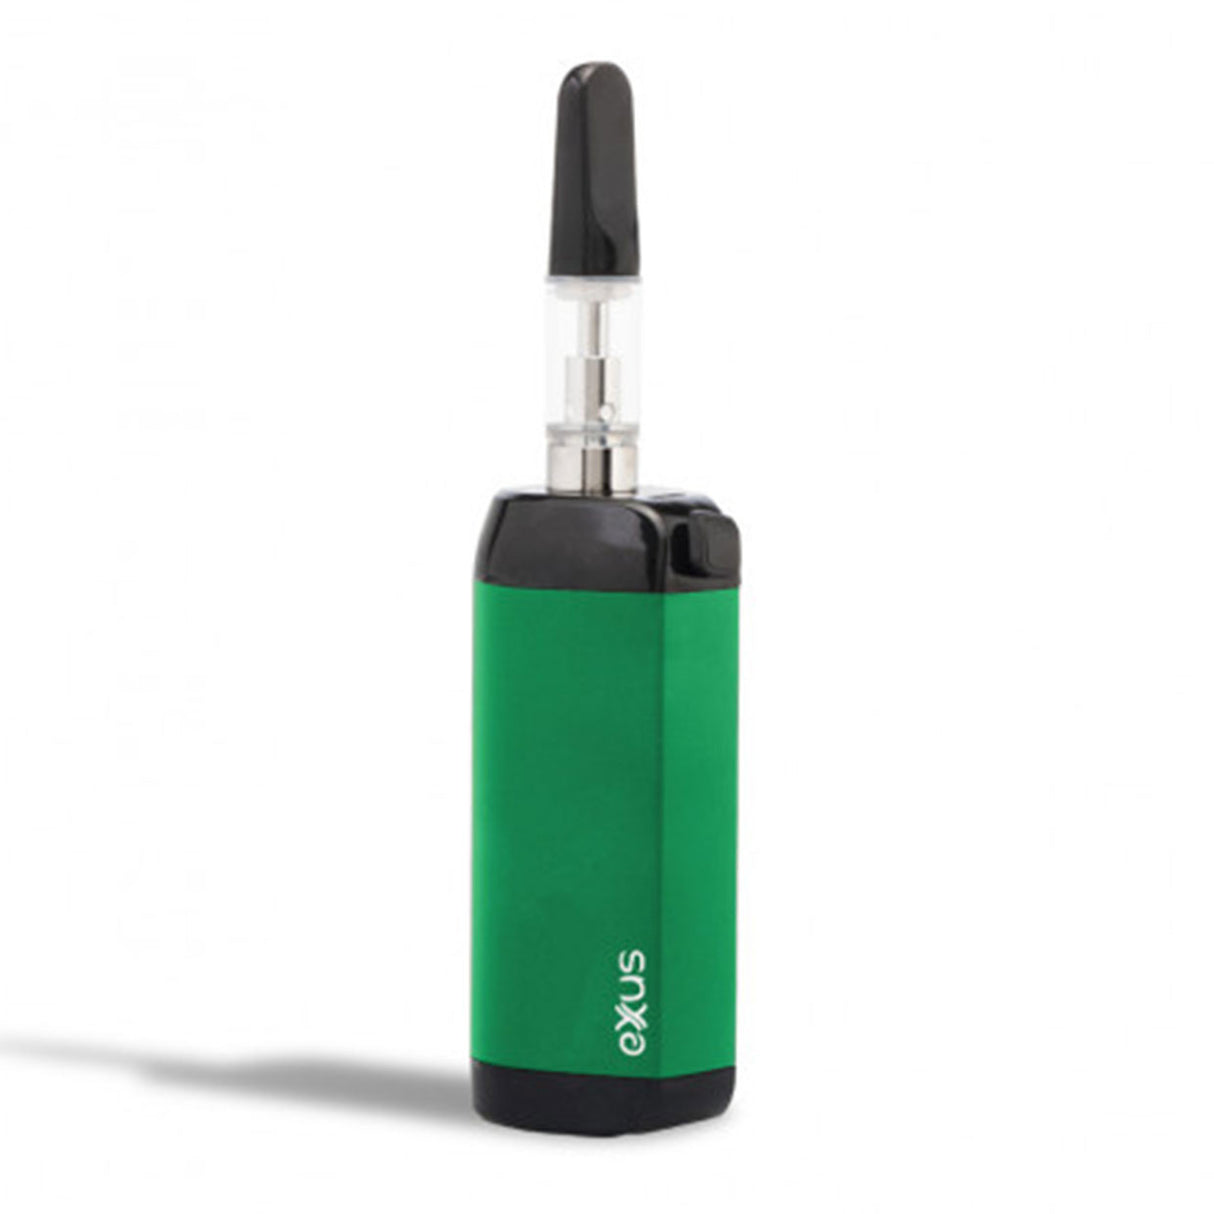 Green Exxus VRS Vaporizer Kit with Nectar Collector Mode, Dab Rig Mode, Cartridge Mode Comes with carrying pouch 5